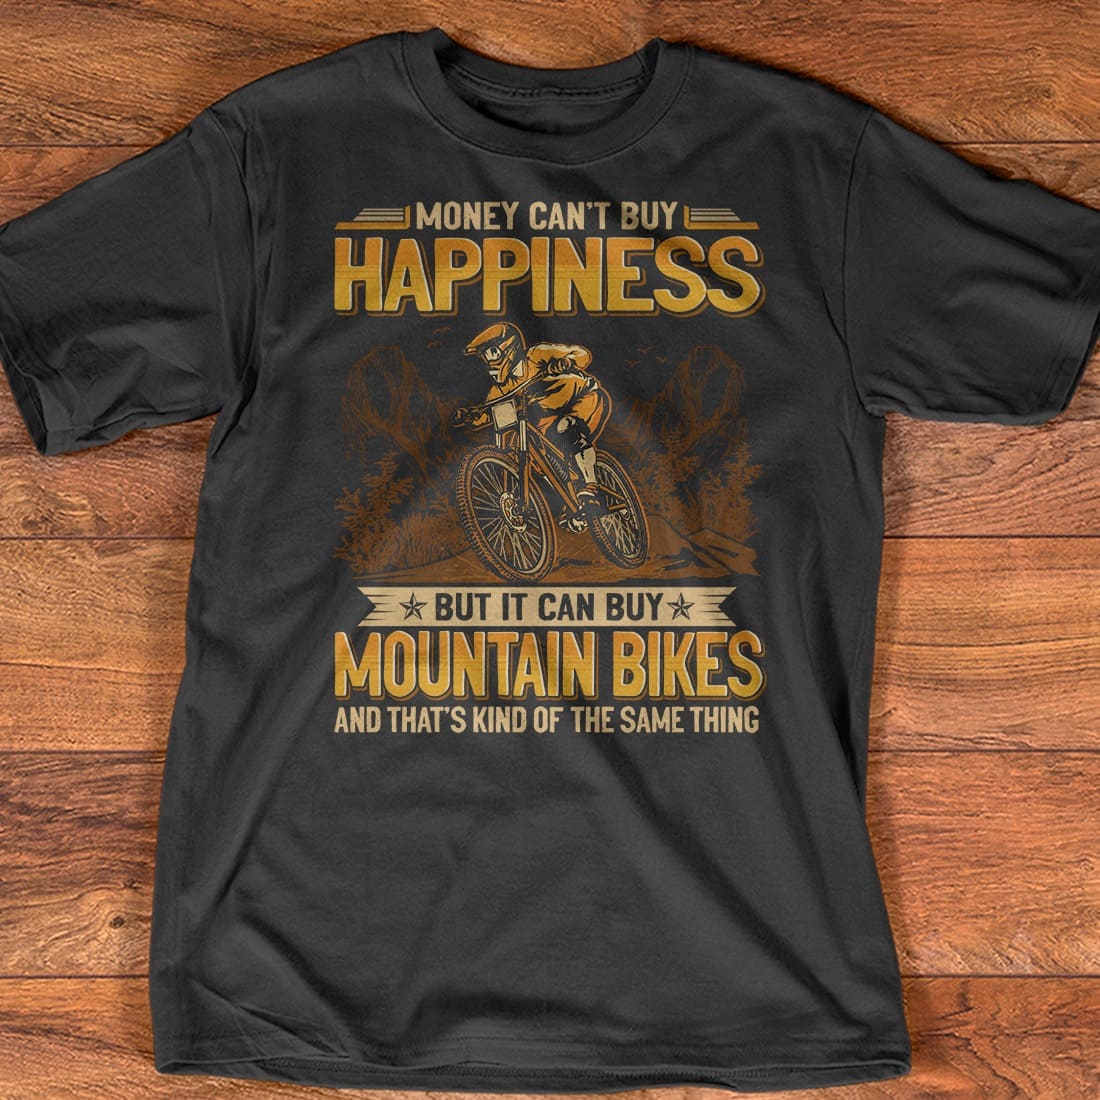 Mountain Biker - Money can't buy happiness but it can buy mountain bikes and that's kind of the same thing